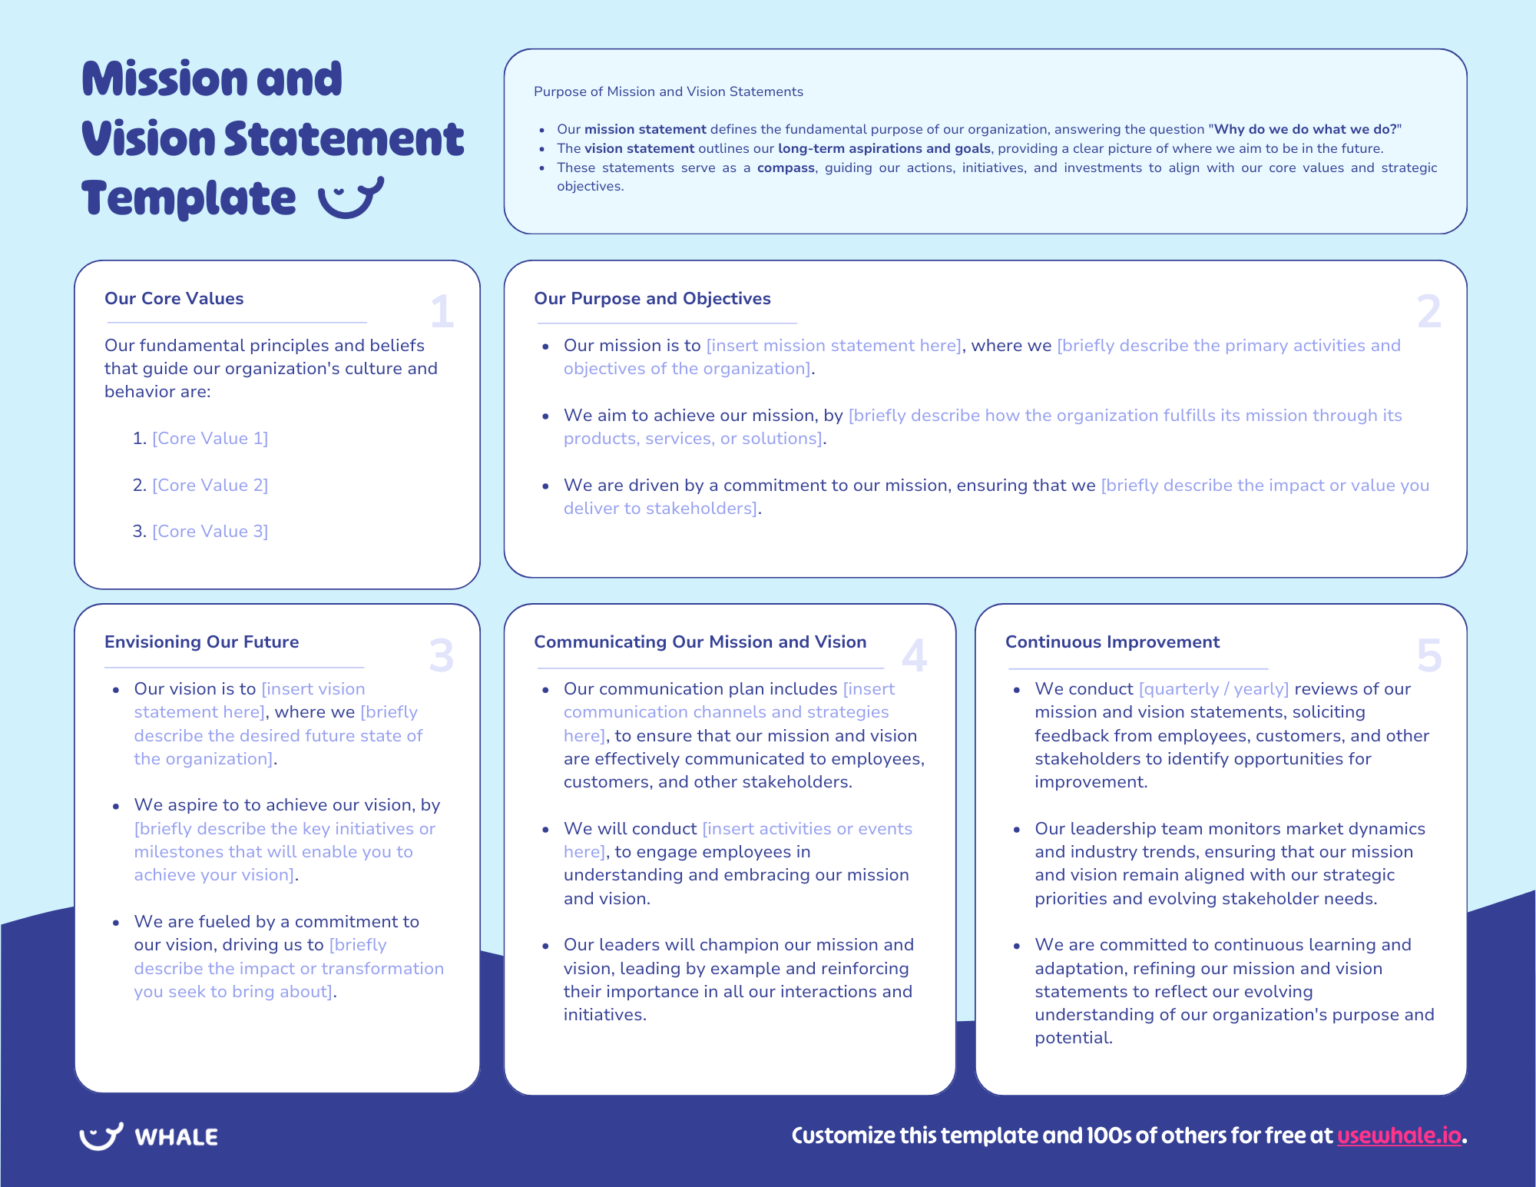 A structured infographic outlining a mission and vision statement template along with core principles and objectives in a blue and white color scheme.